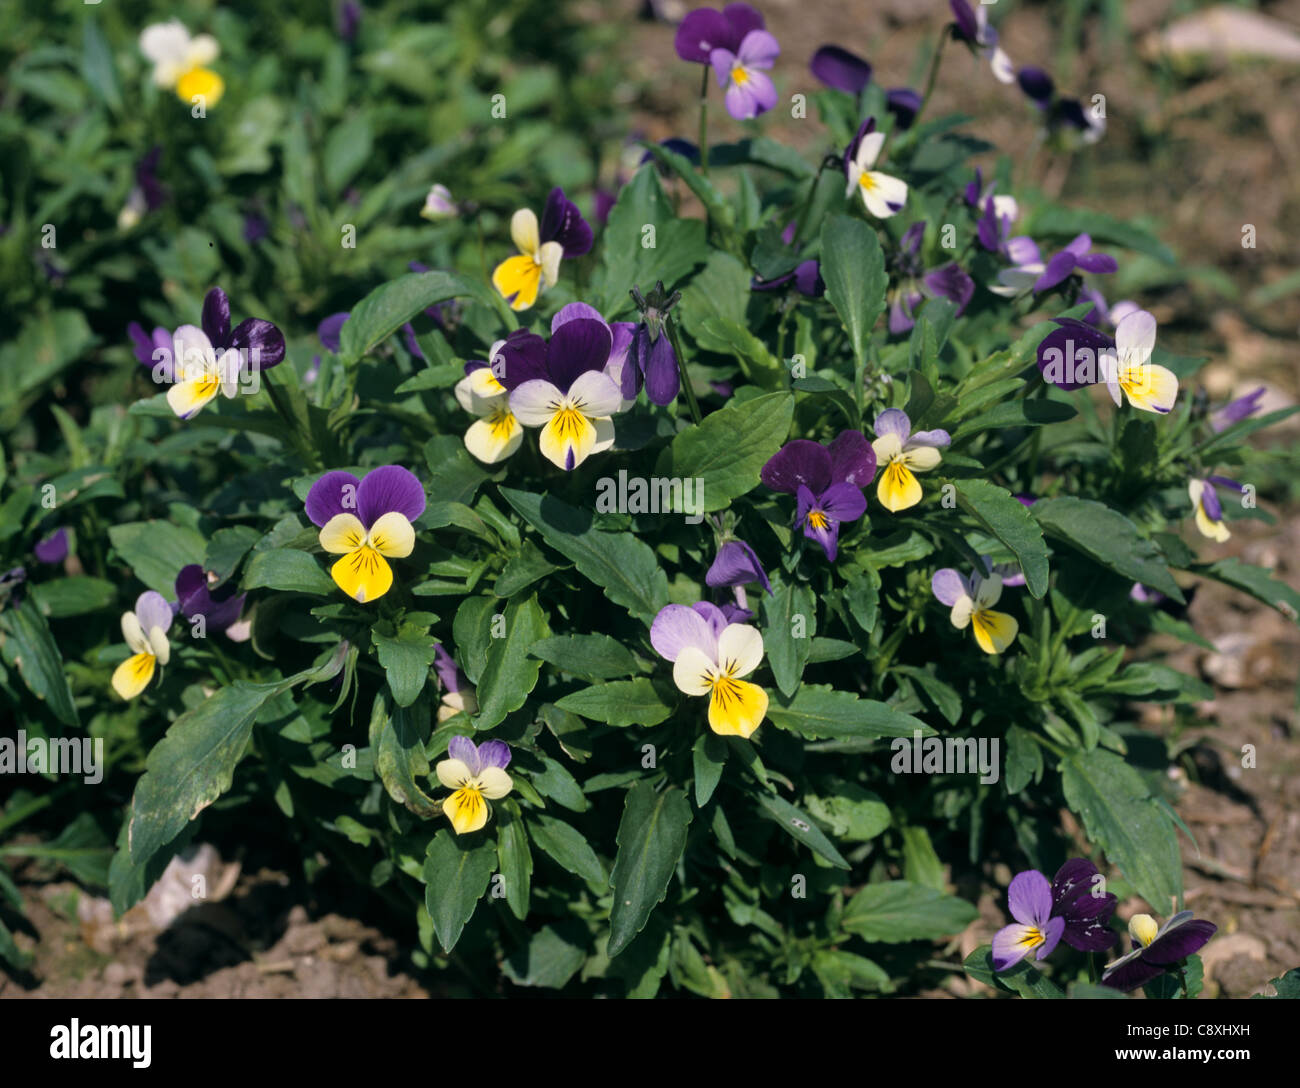 Heartsease johnny jumpup or wild pansy (Viola tricolor) flowering plants Stock Photo